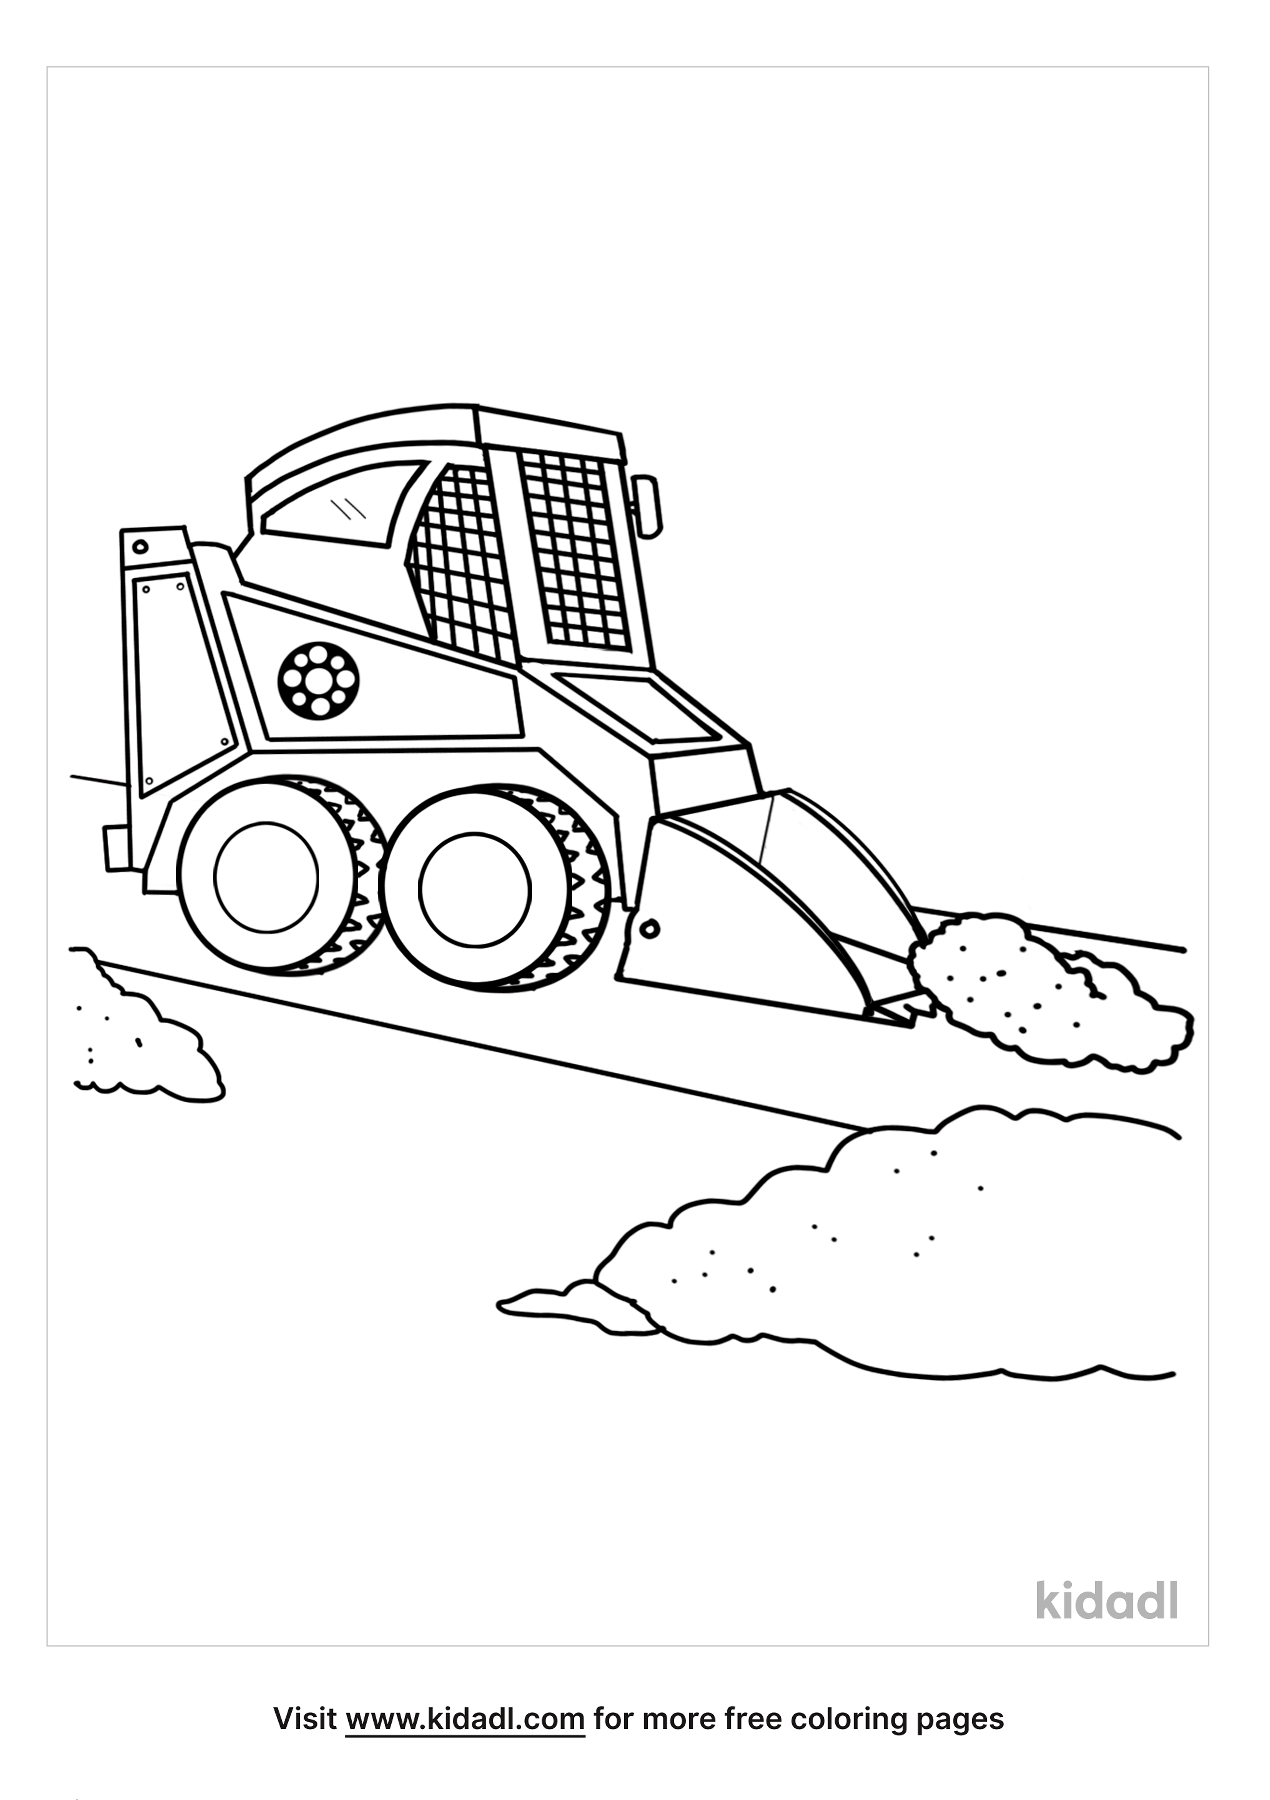 Skid Steer Coloring Pages | Free Vehicles Coloring Pages | Kidadl